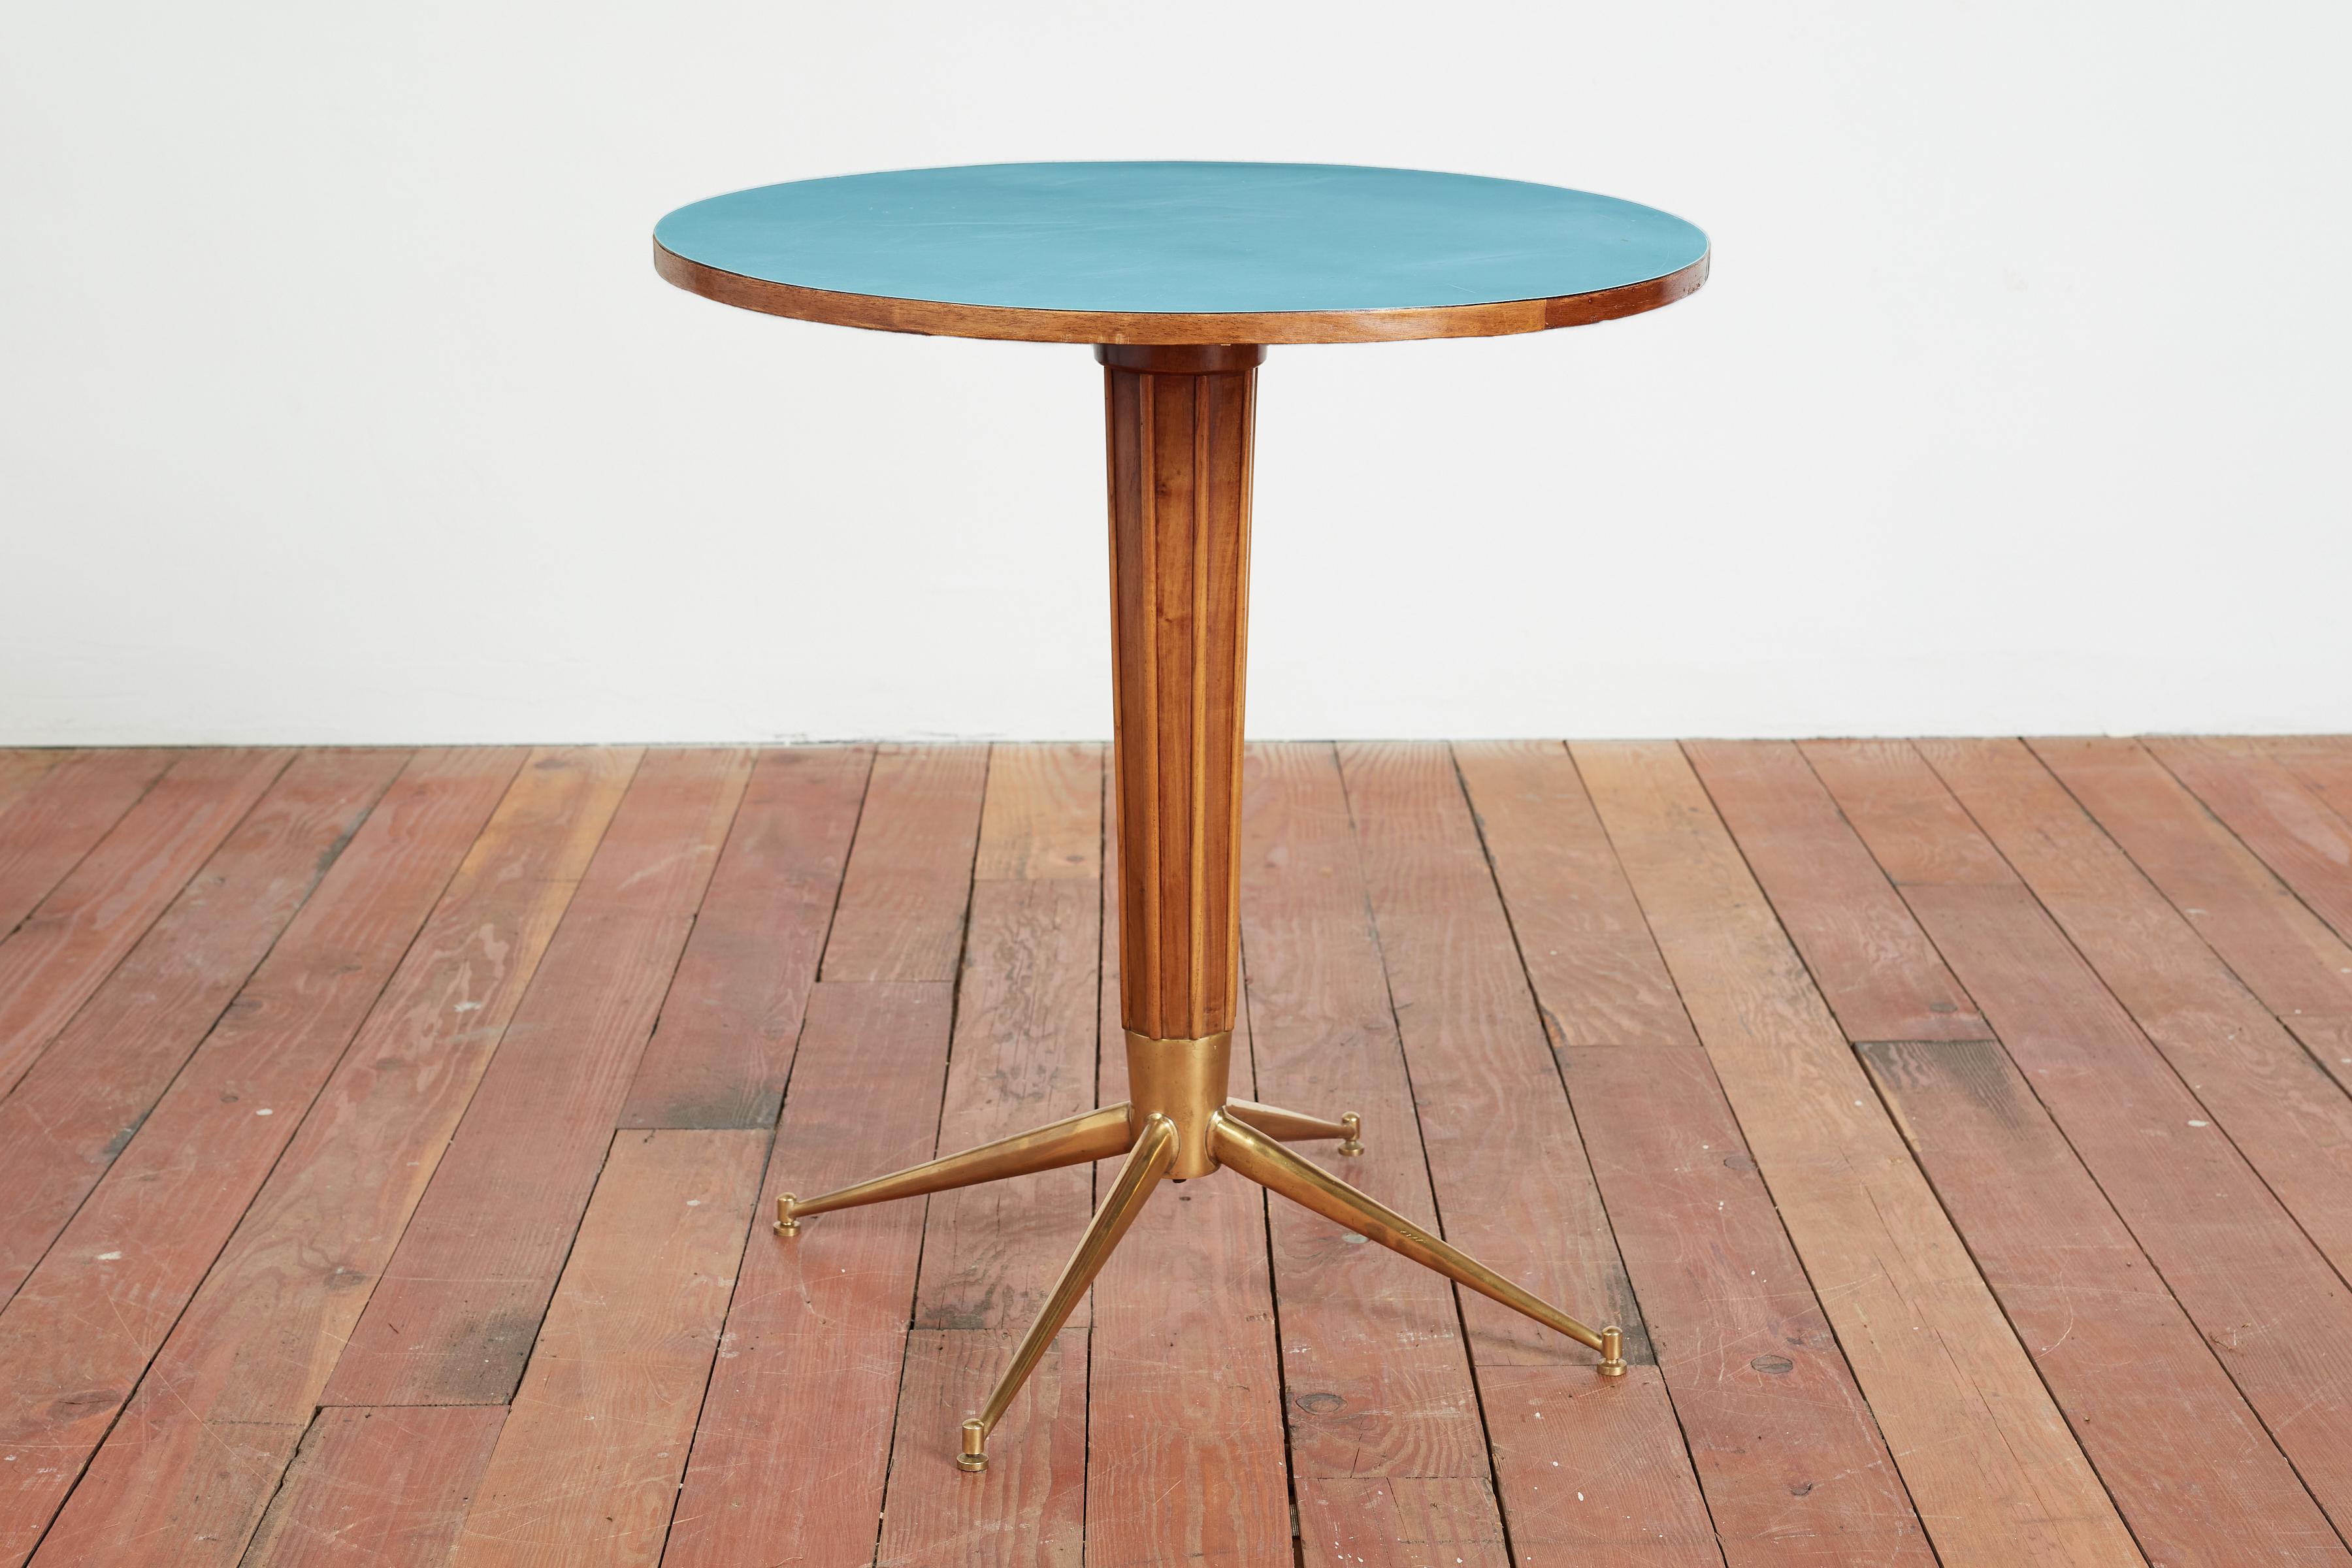 Wonderful pedestal table with fluted wood base, brass legs and original 